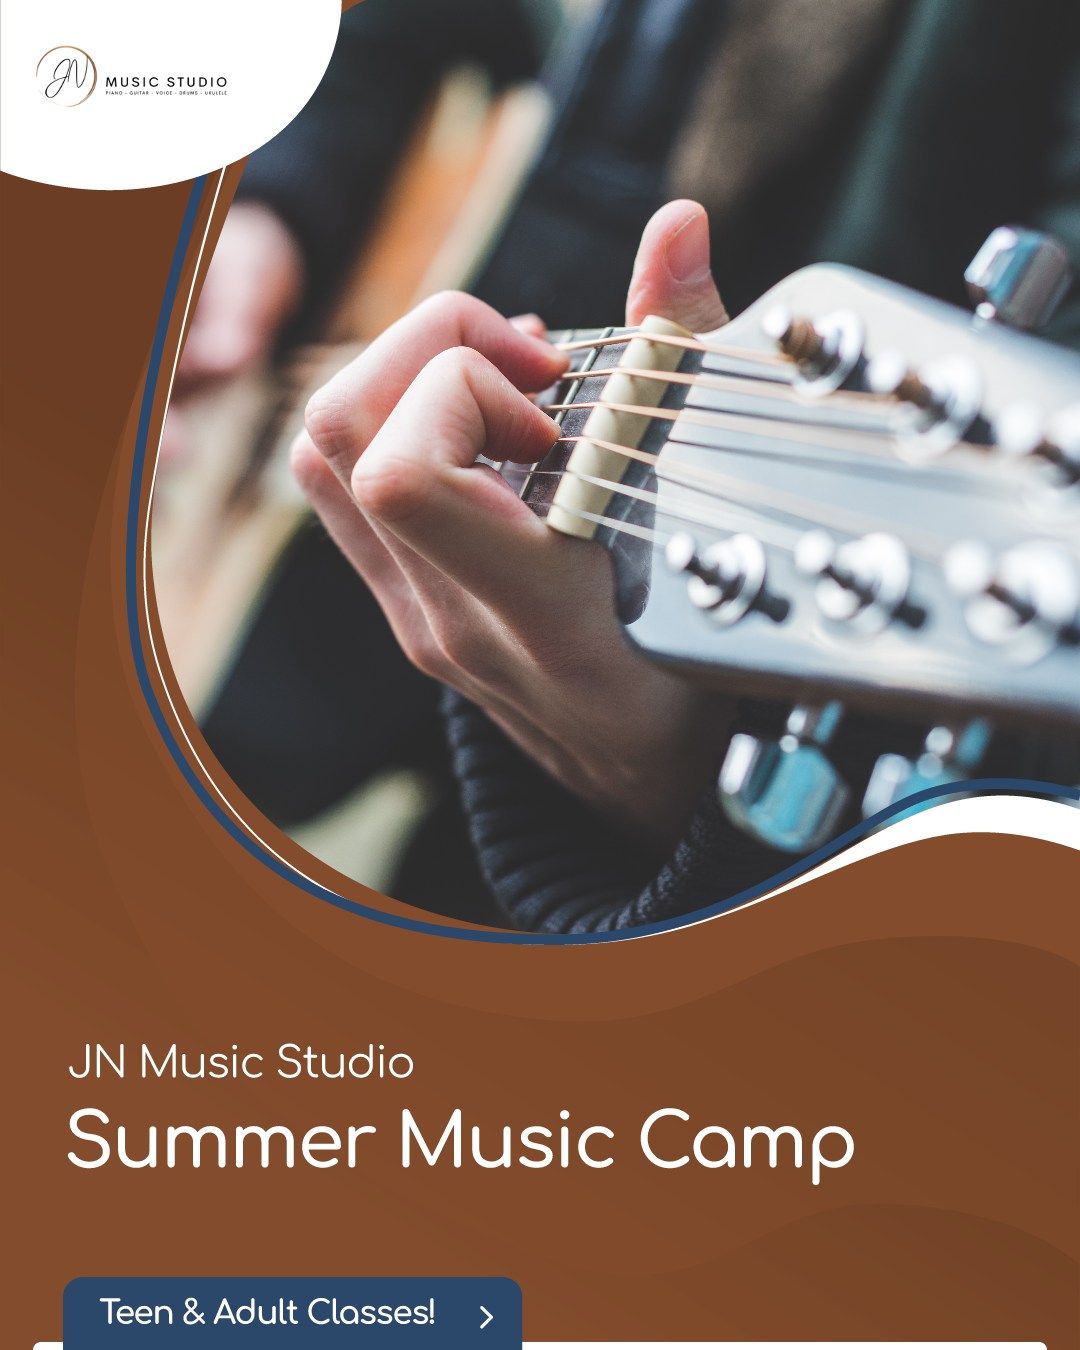 Our 2nd Annual Summer Music Camp